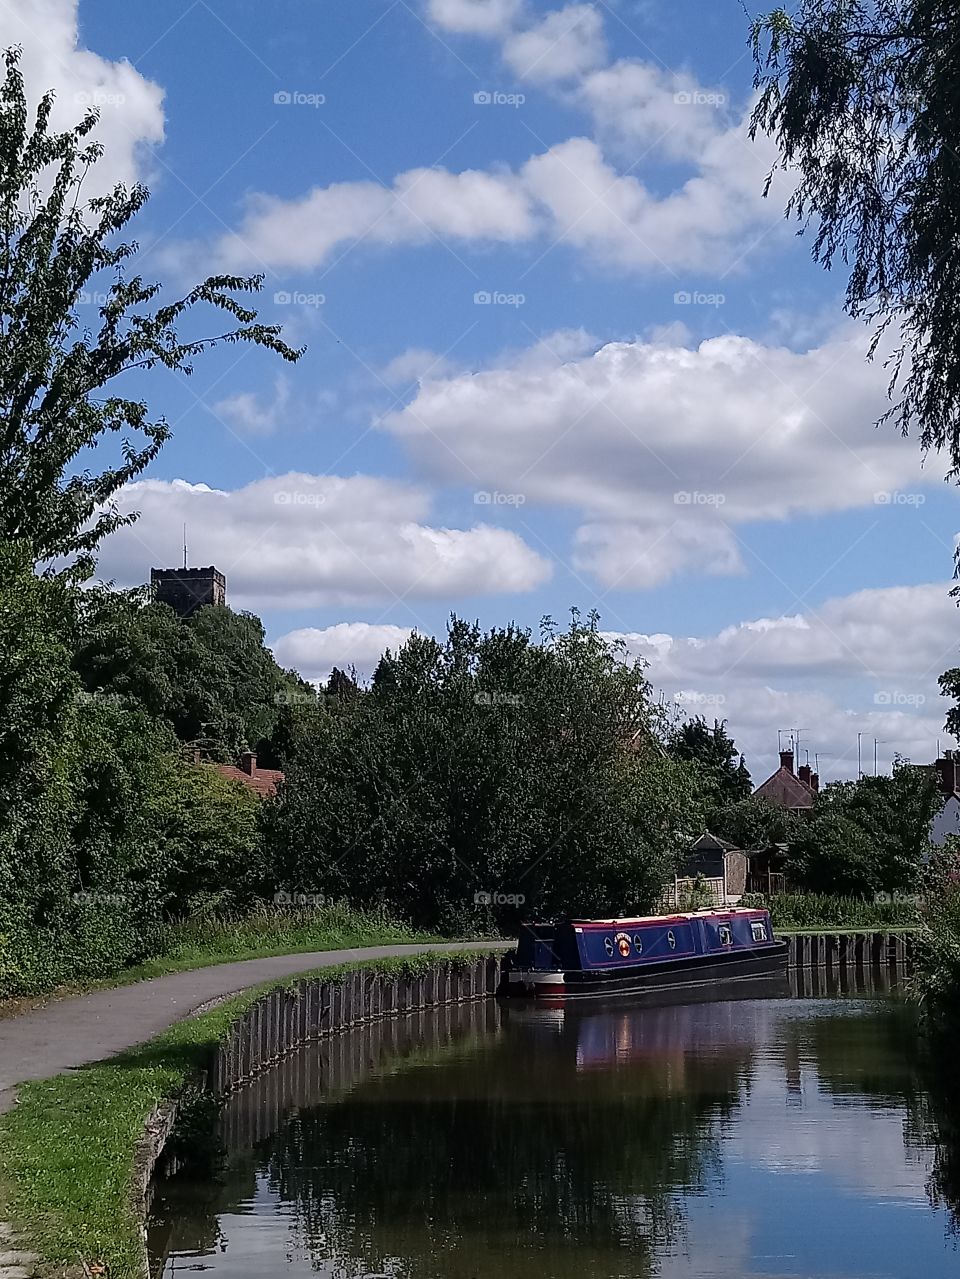 Canalside on a sunny day